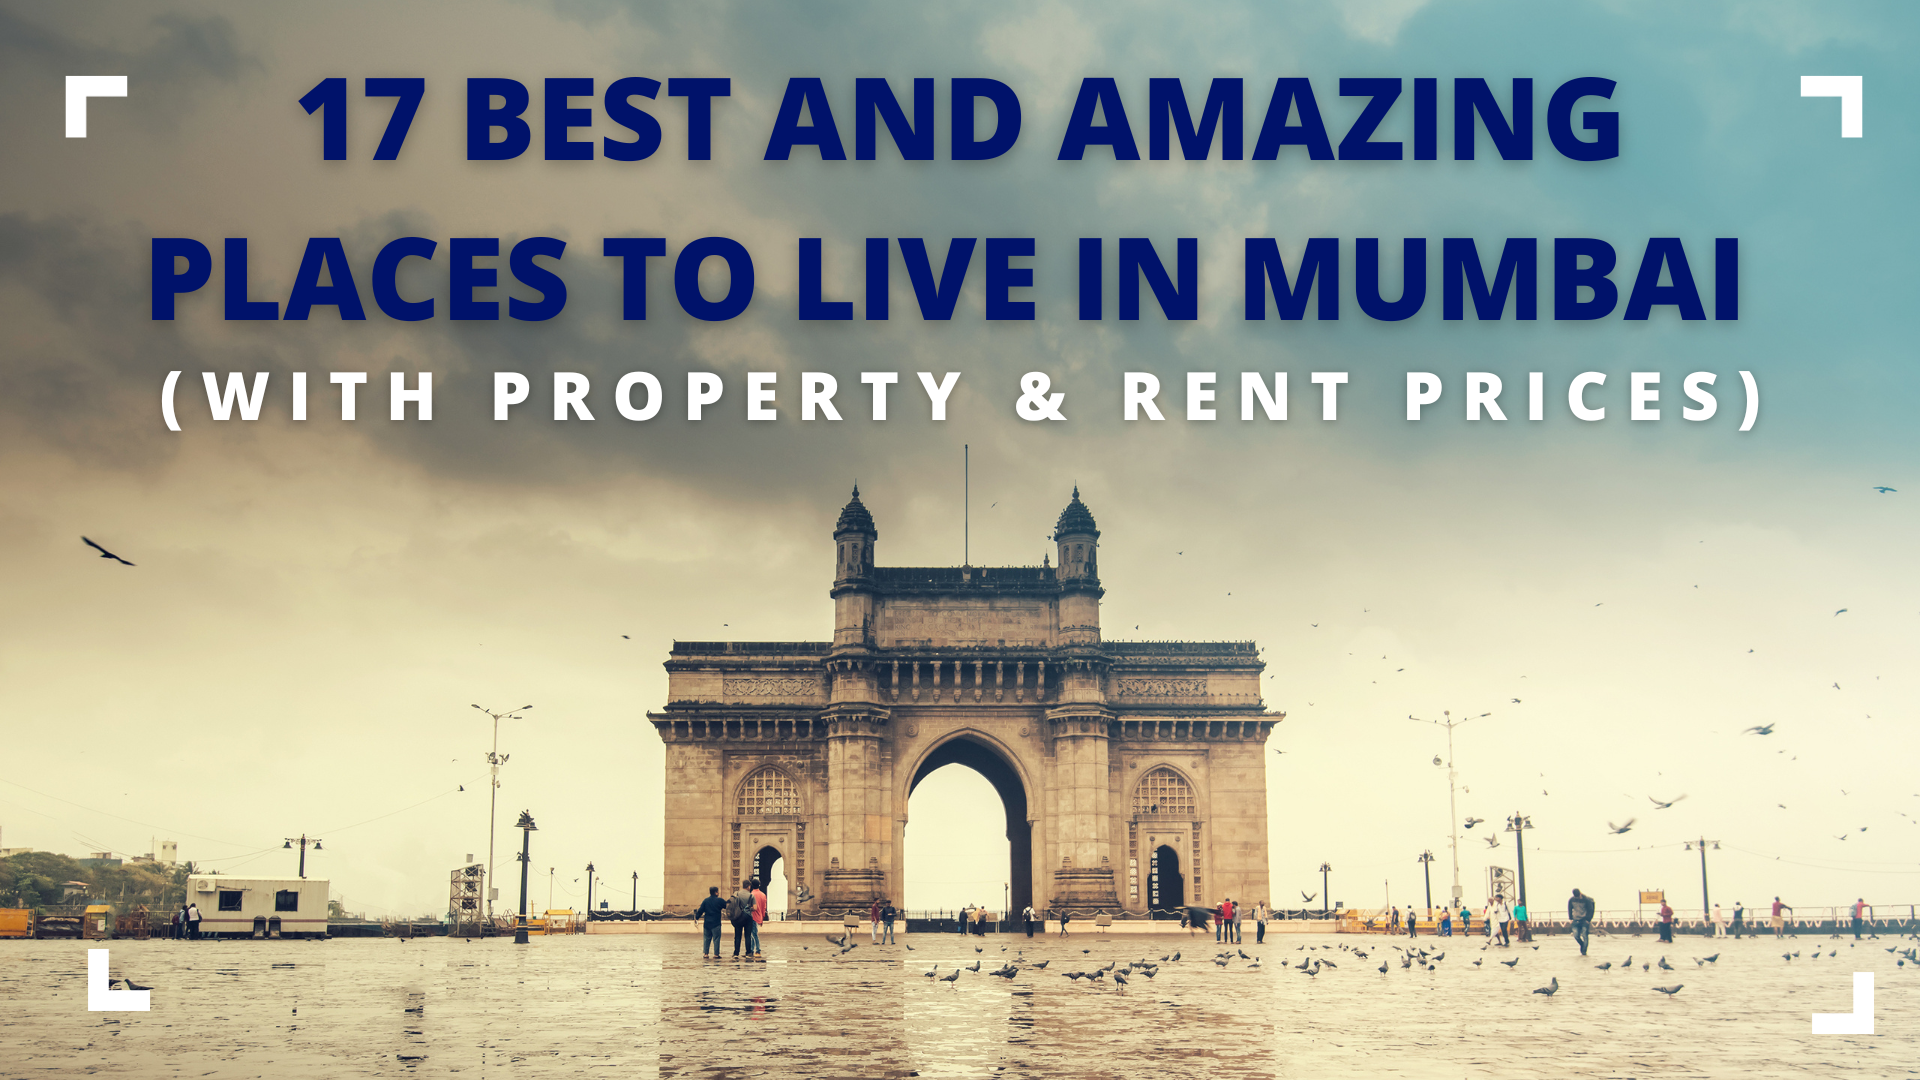 17 Best and Amazing Places to Live in Mumbai